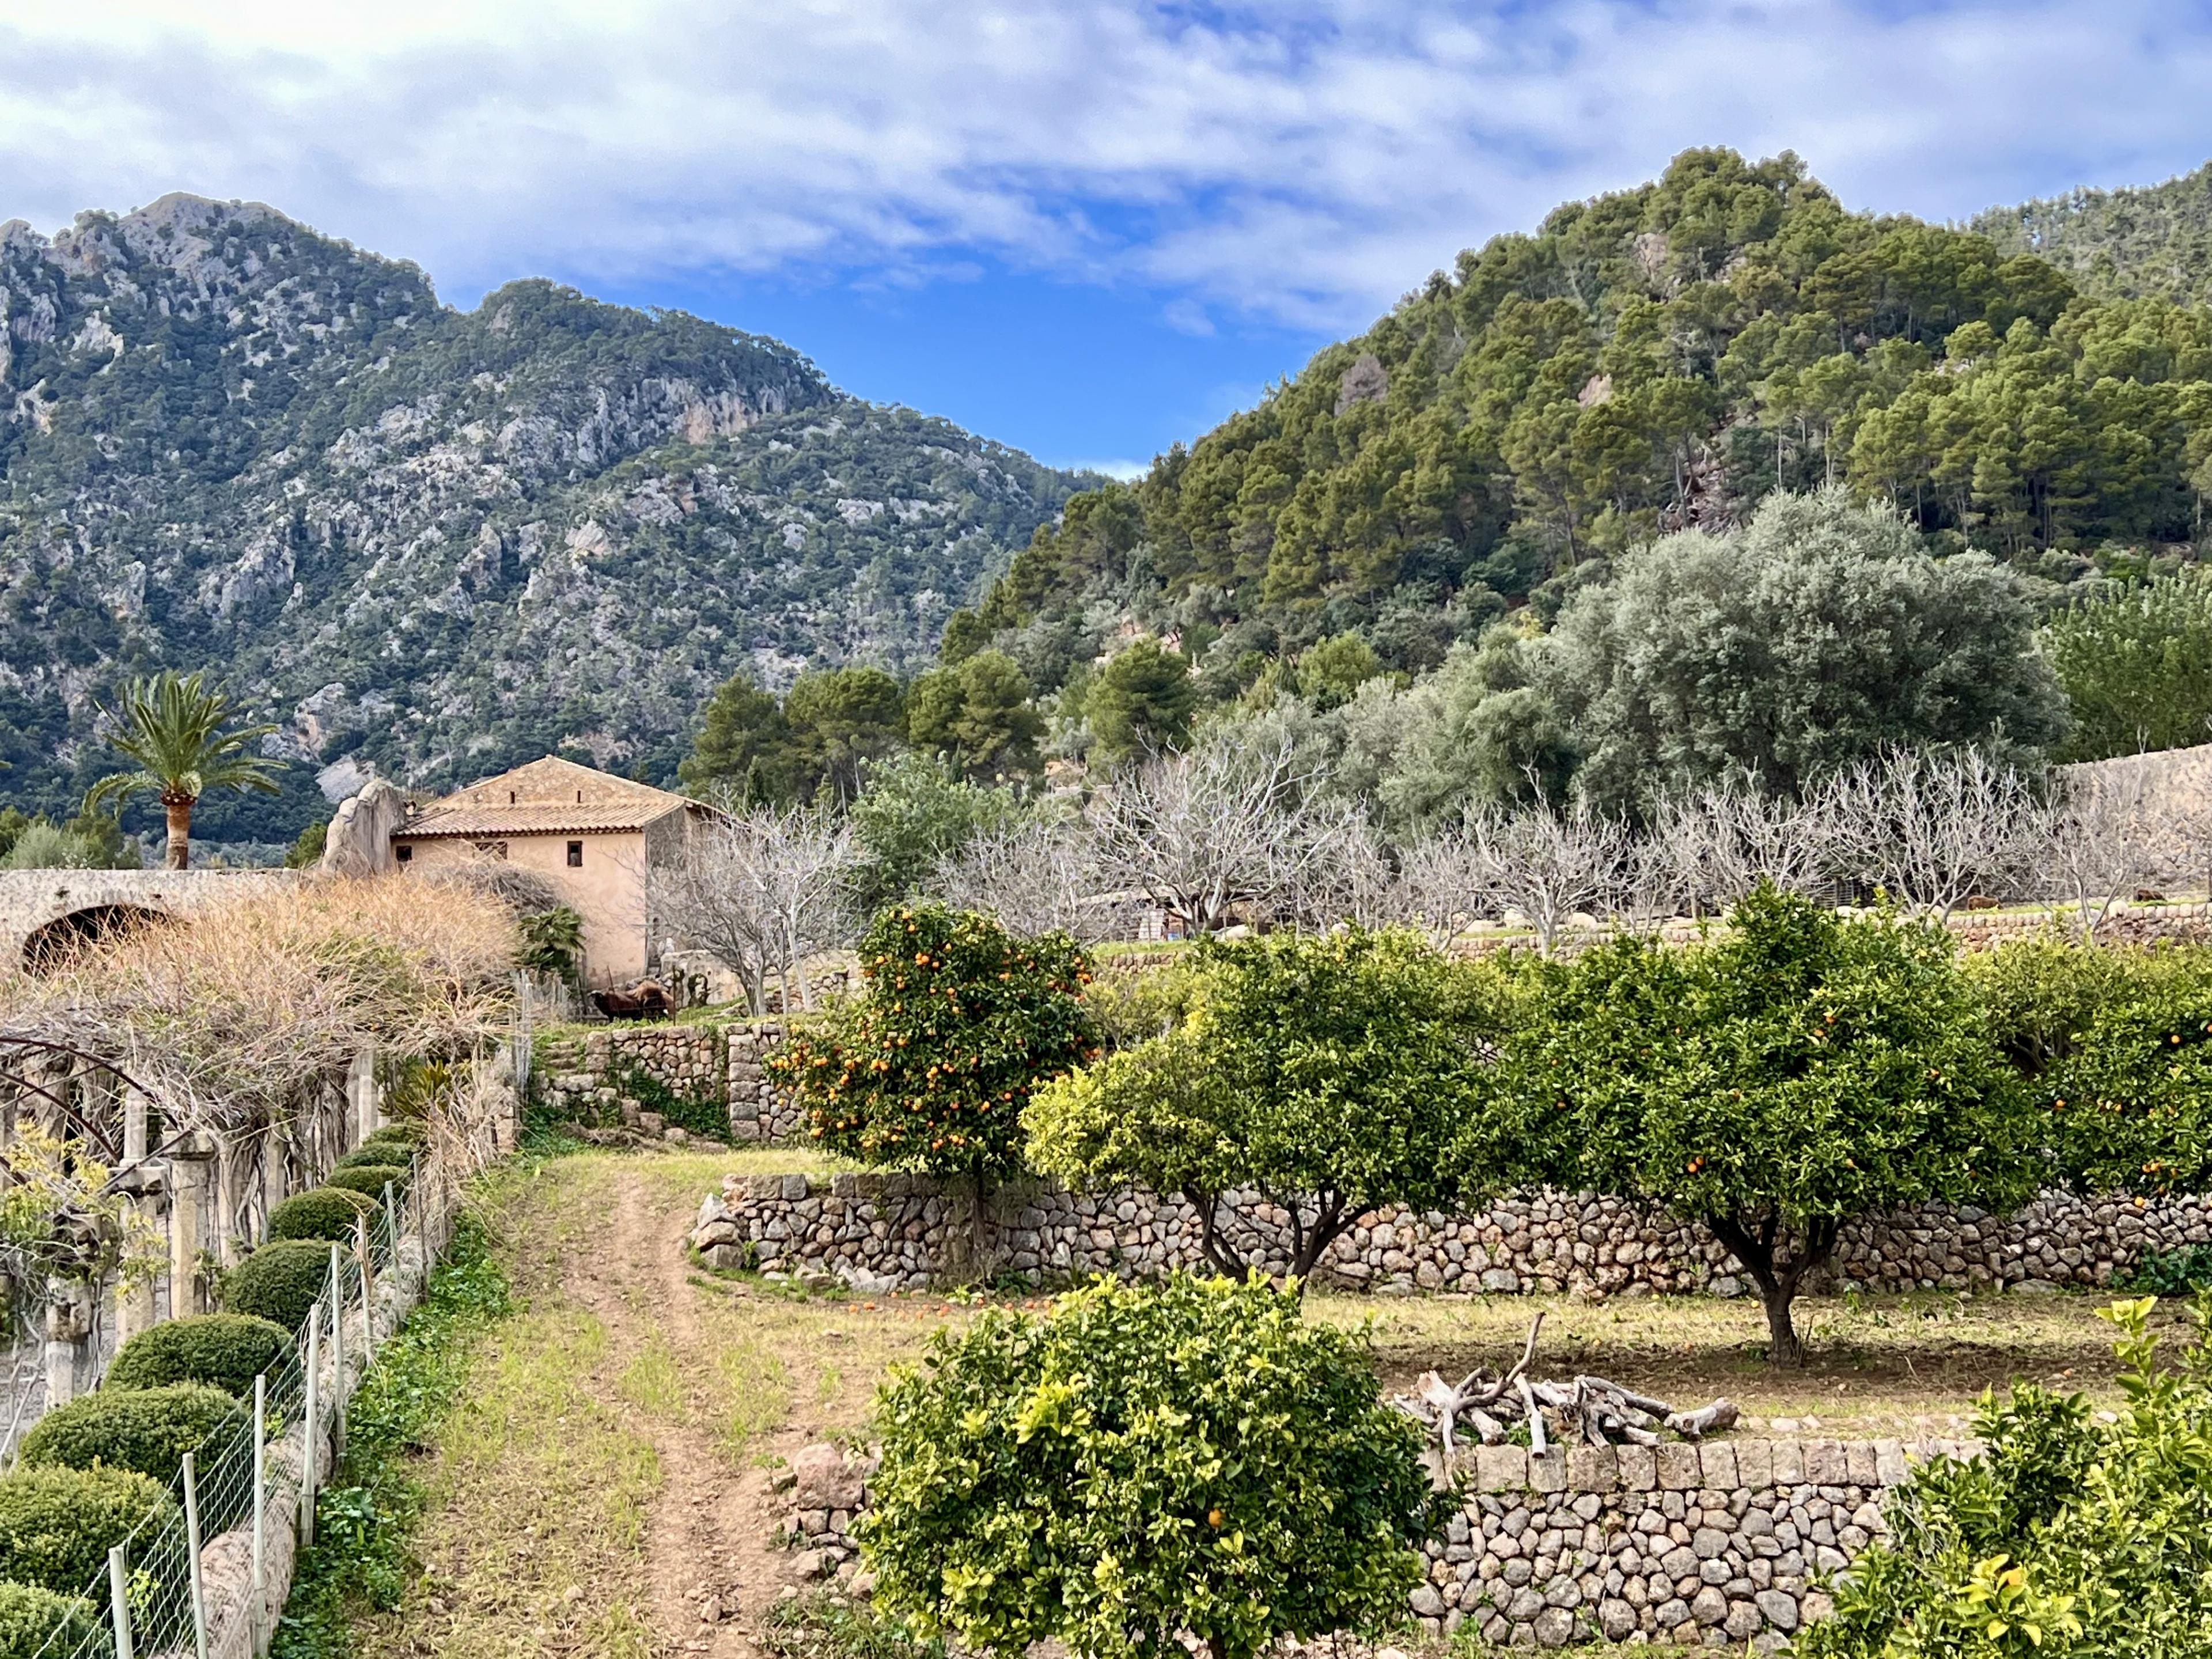 Orange and lemon trees in an orchard next to a historic old home set against the mountains 